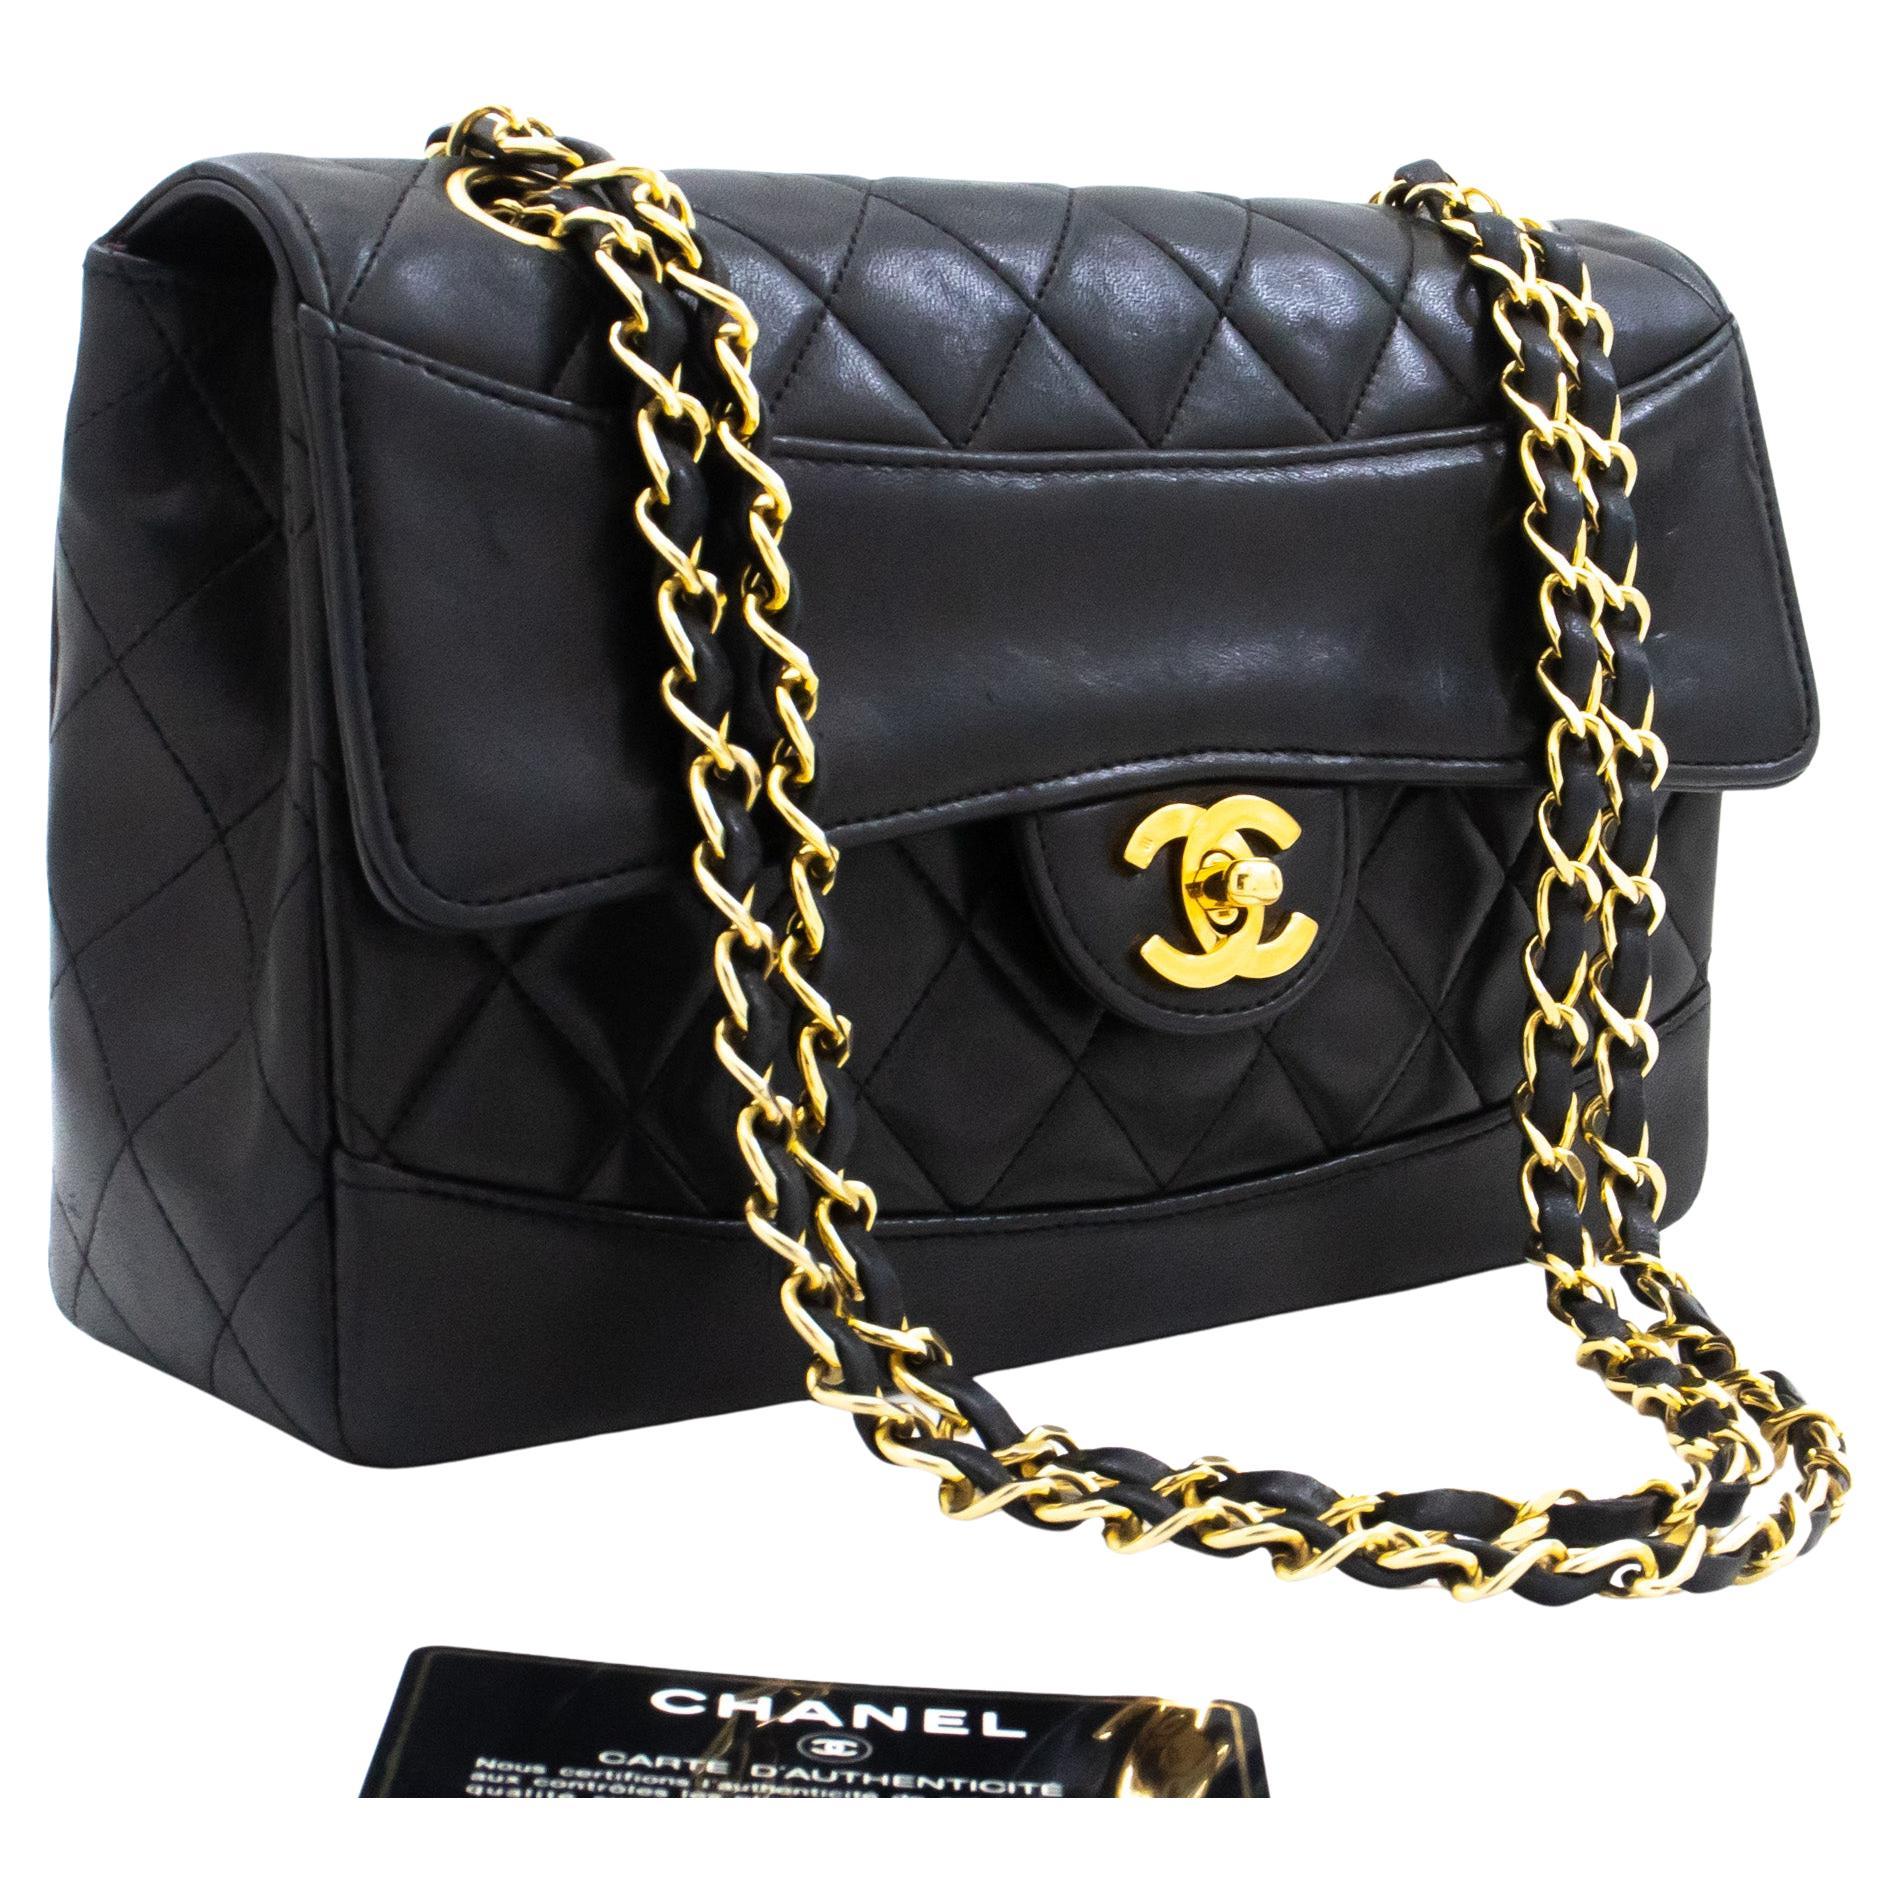 CHANEL Mini Rectangular Flap Quilted Lambskin Leather Shoulder Bag Bla